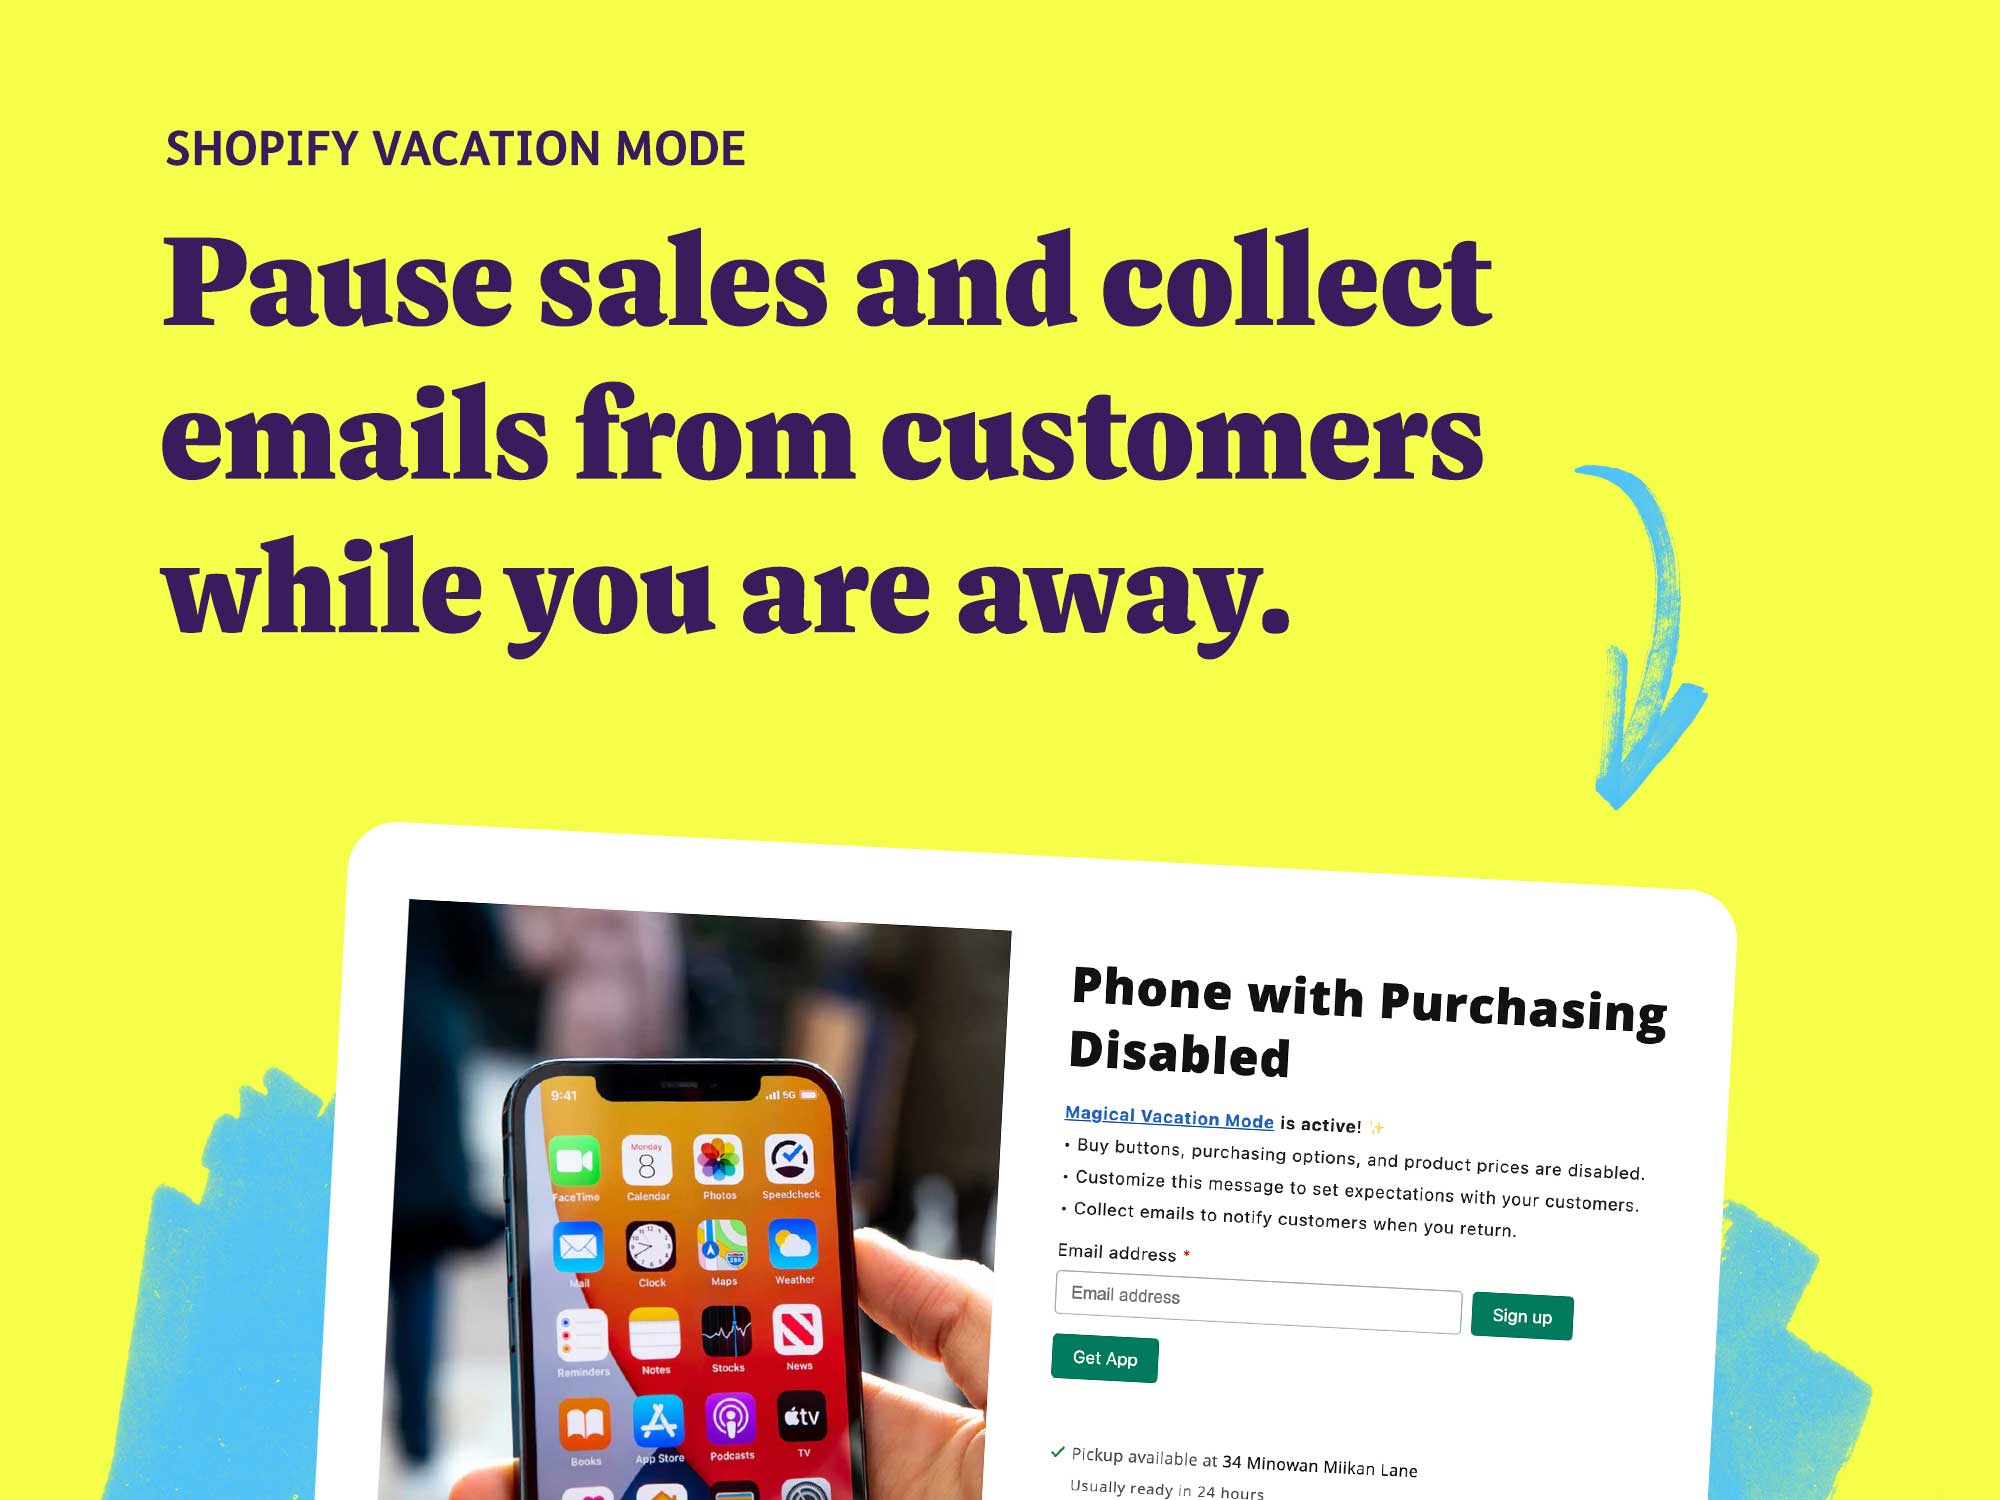 Pause sales and collect emails from customers while you are away.